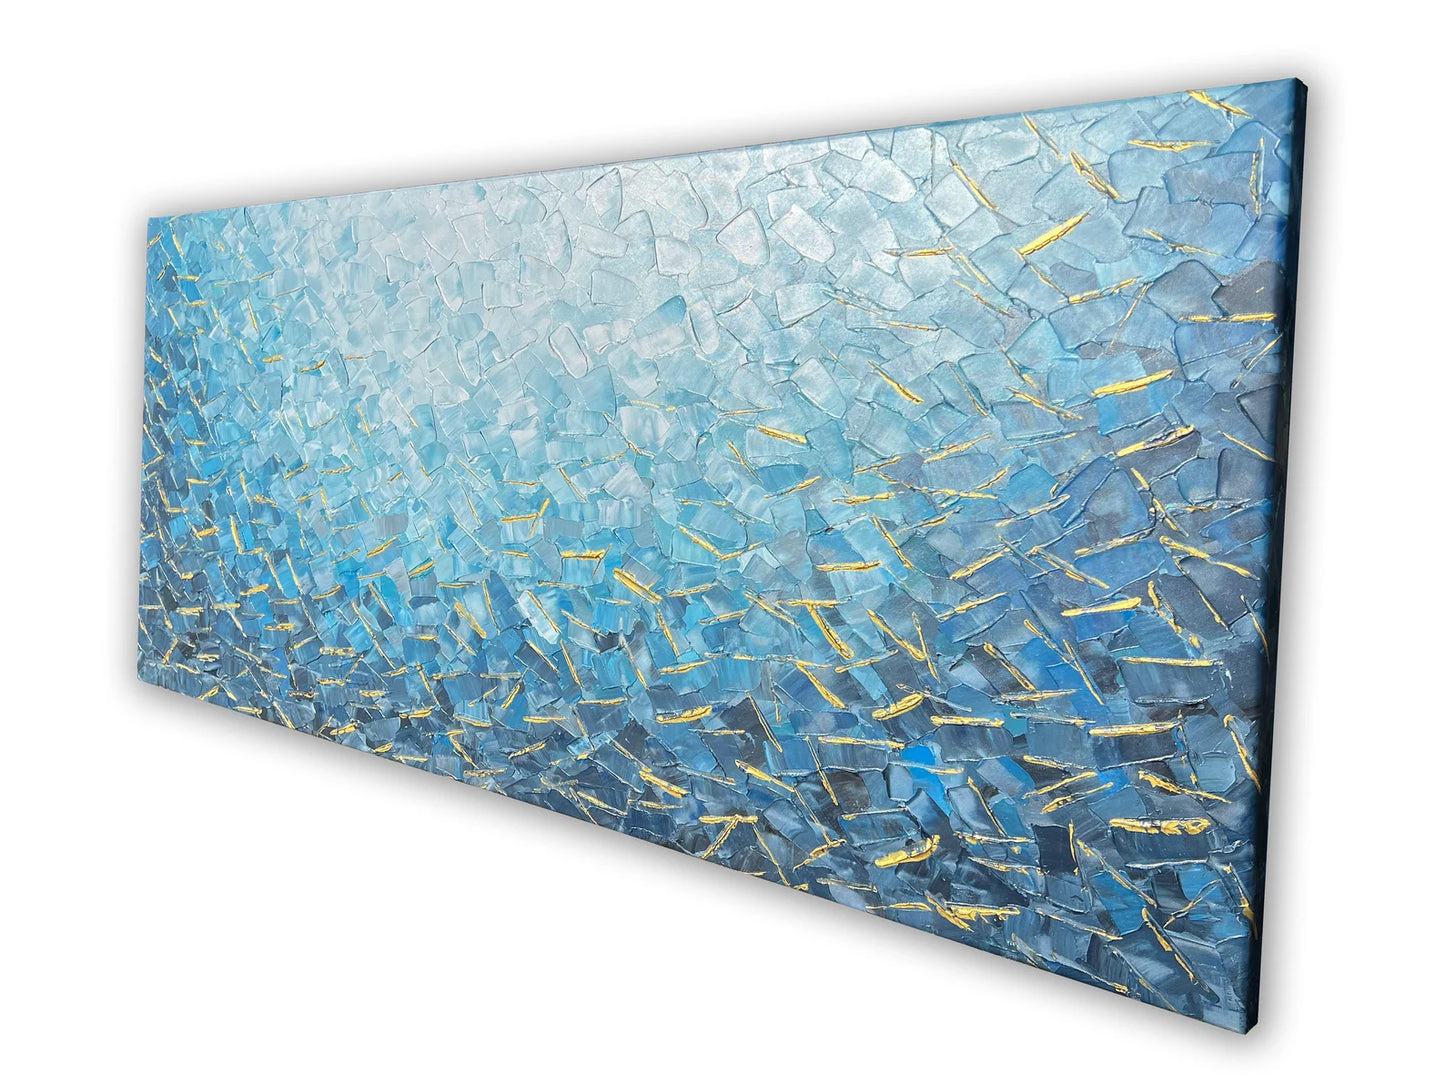 Abstract Hand-painted "Aqua Dreams: A Study of Sunlight and Ocean" Oil painting, Modern artwork- Wrapped Canvas Painting